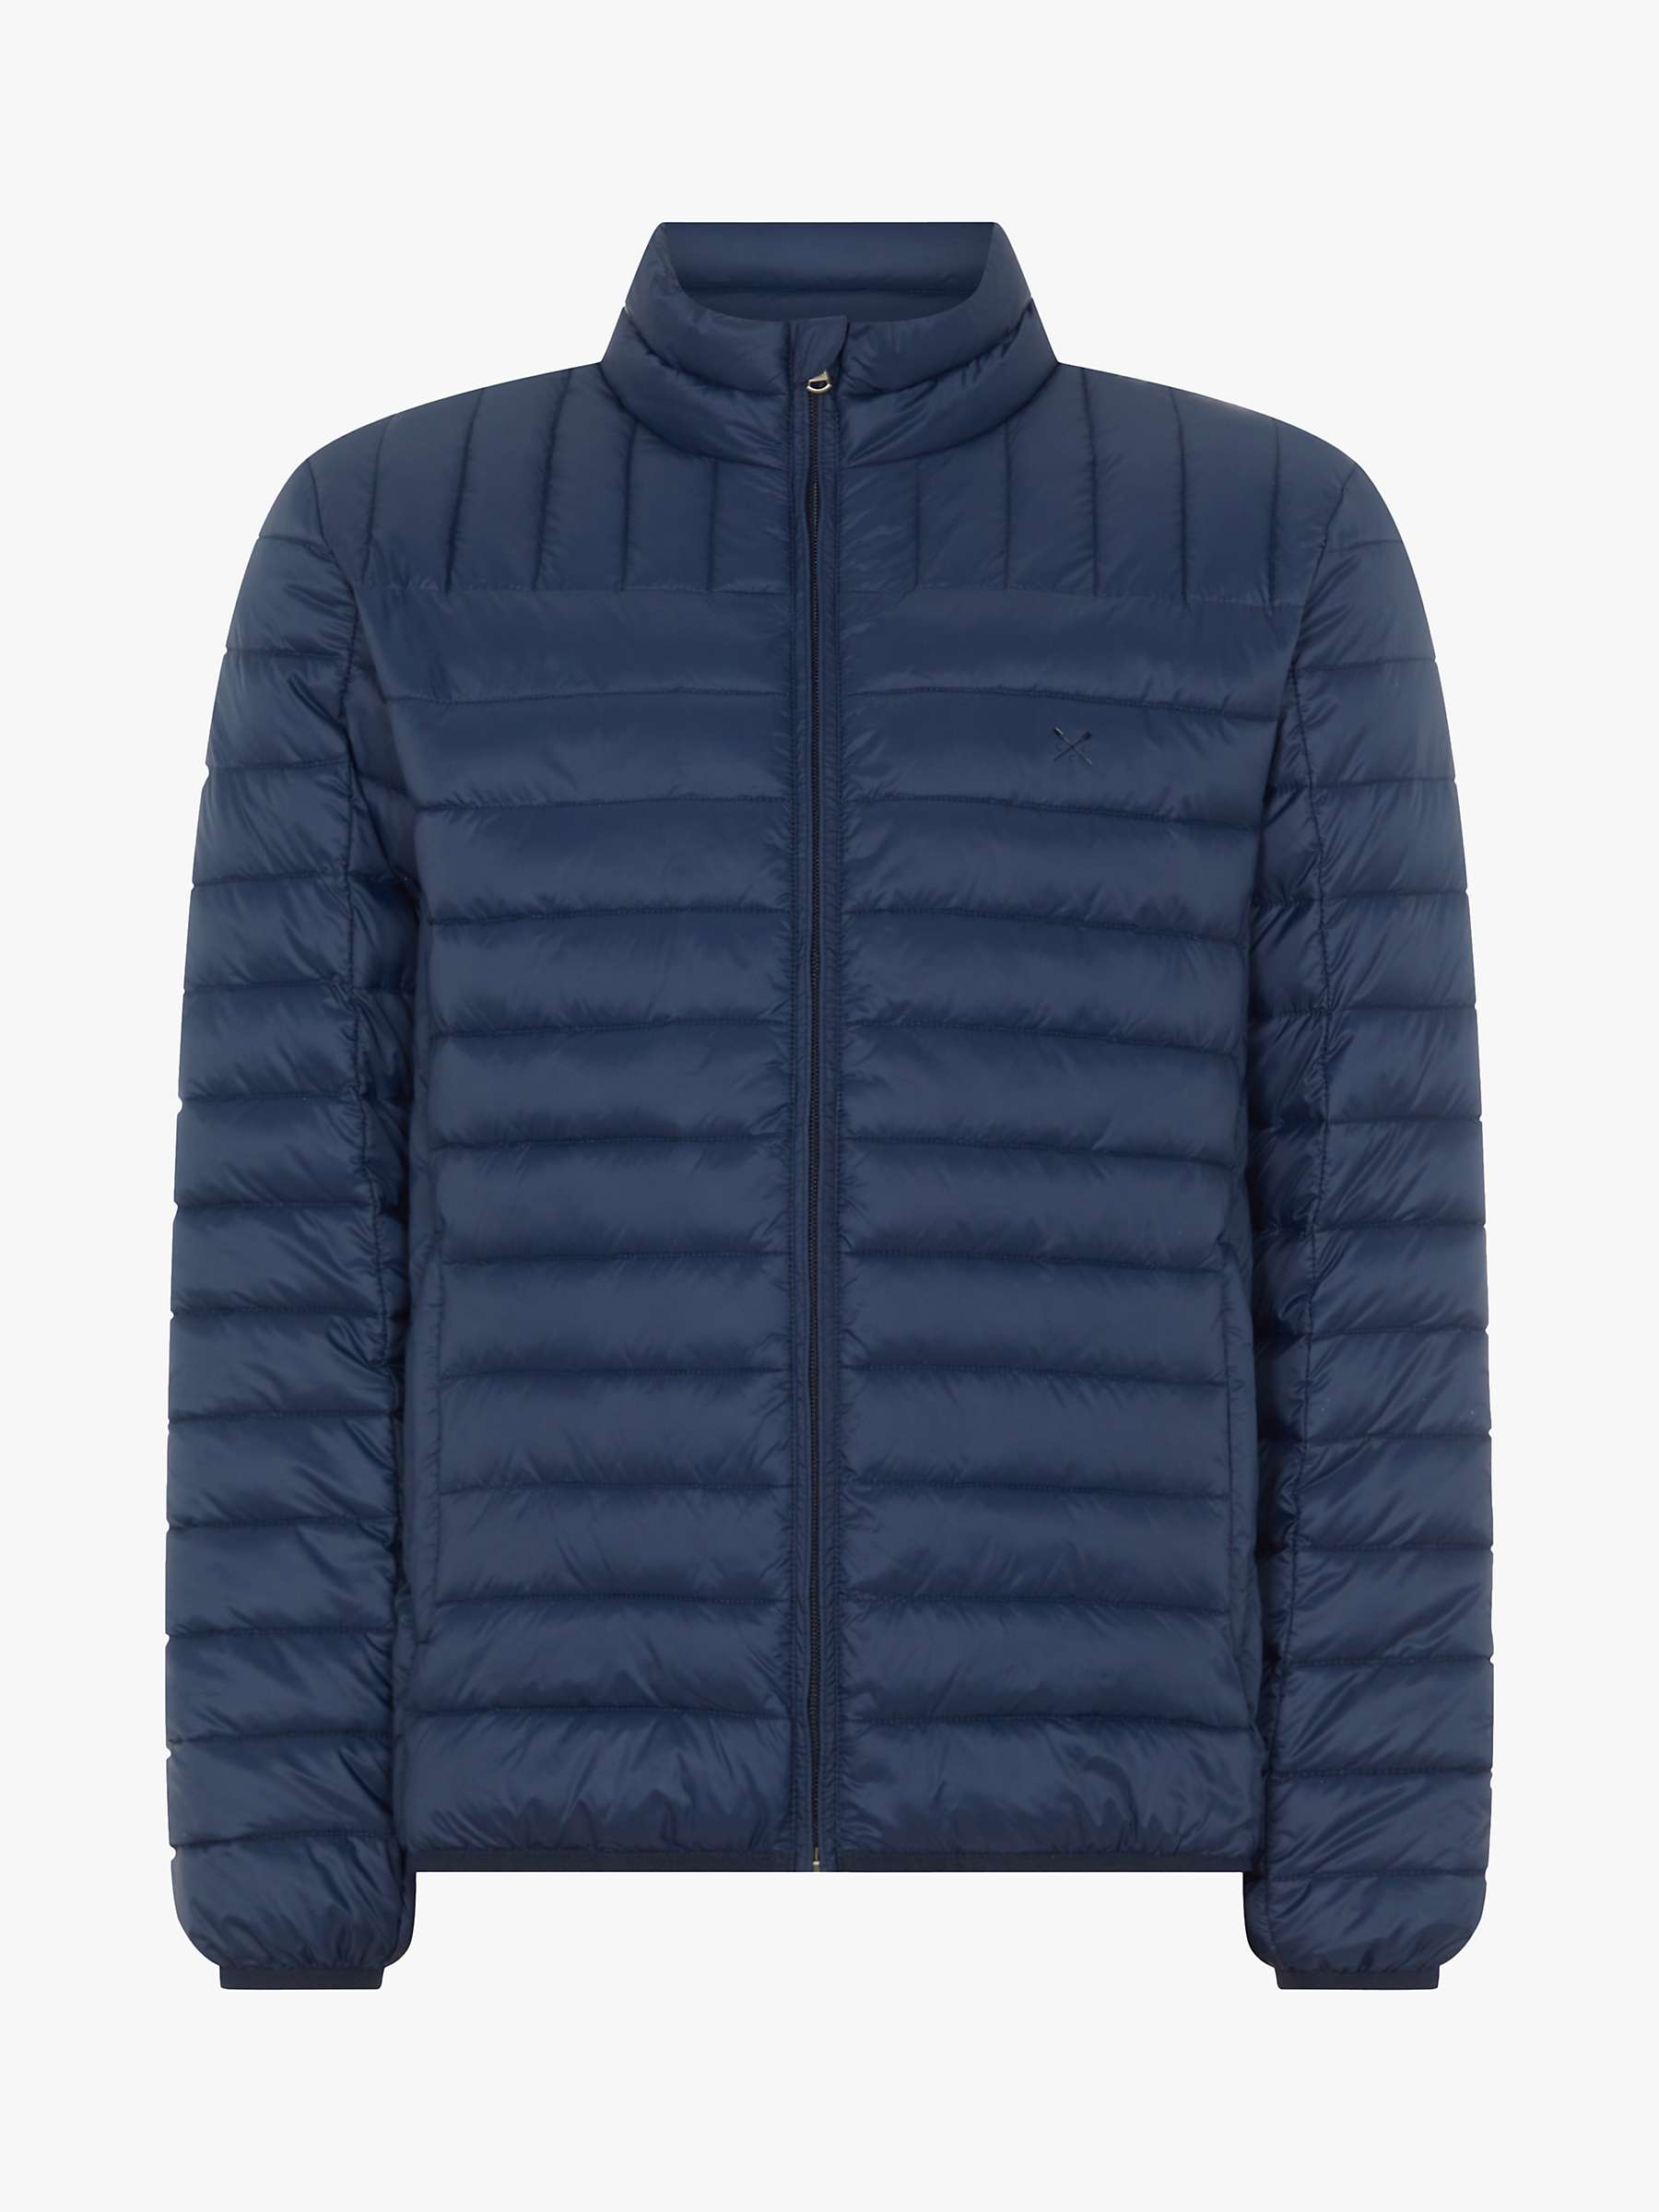 Buy Crew Clothing Lowther Lightweight Jacket Online at johnlewis.com